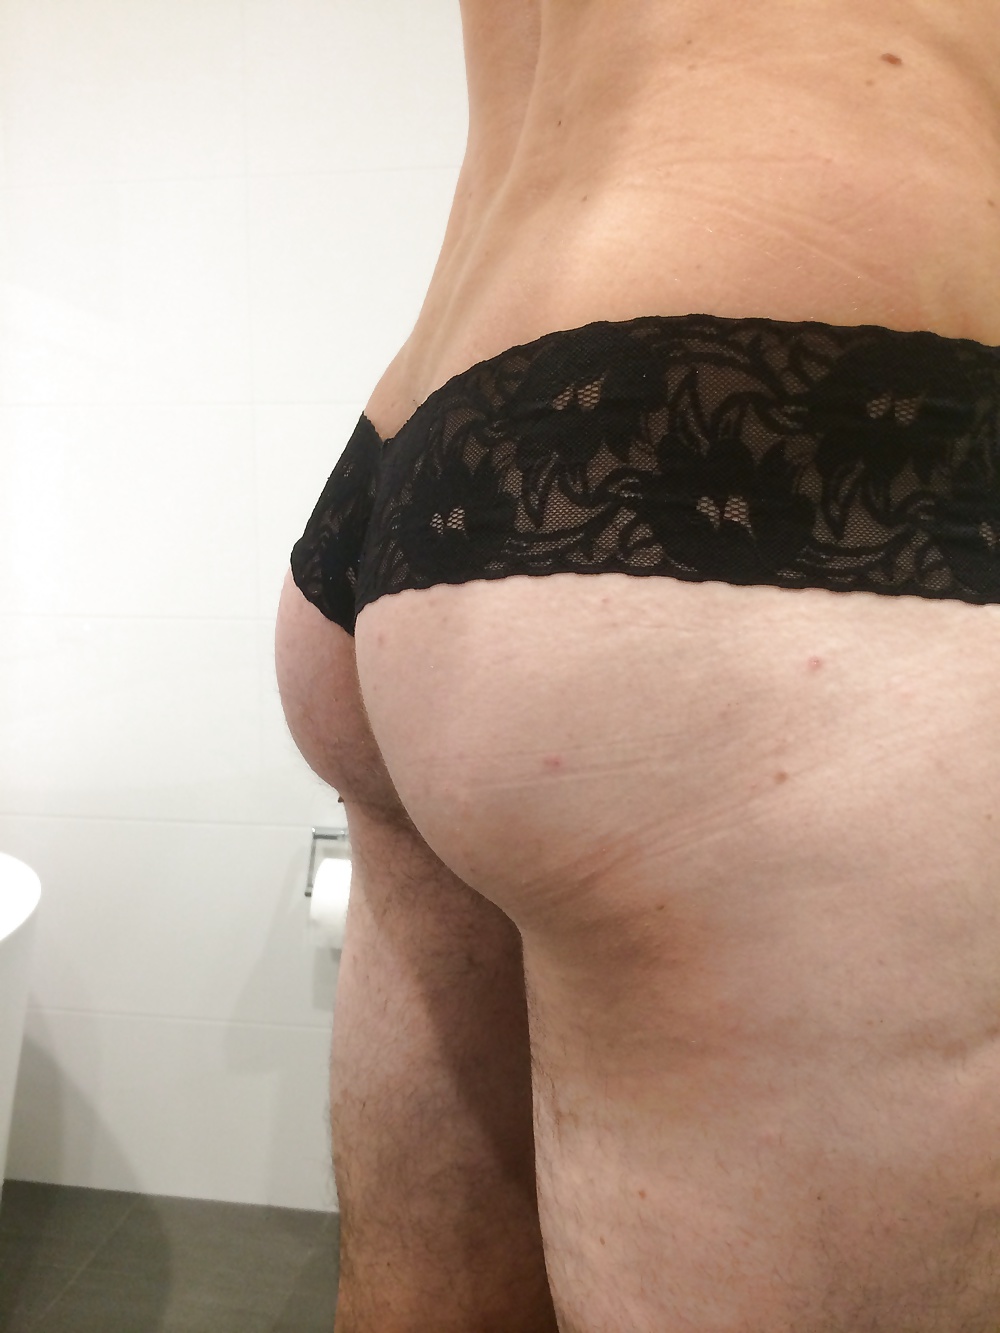 Some more of my panties  #27464292